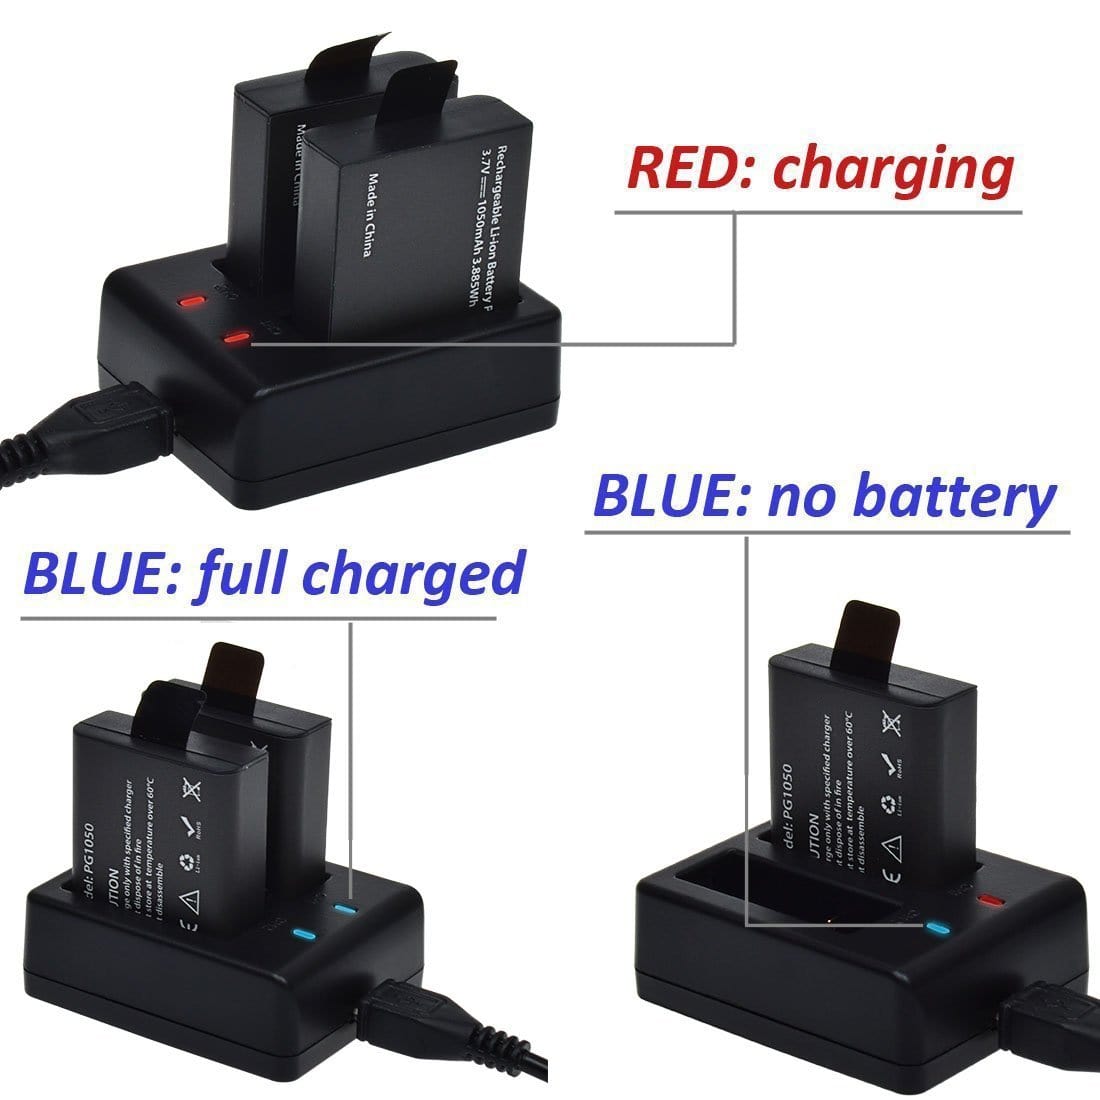 Campark Action Camera charger